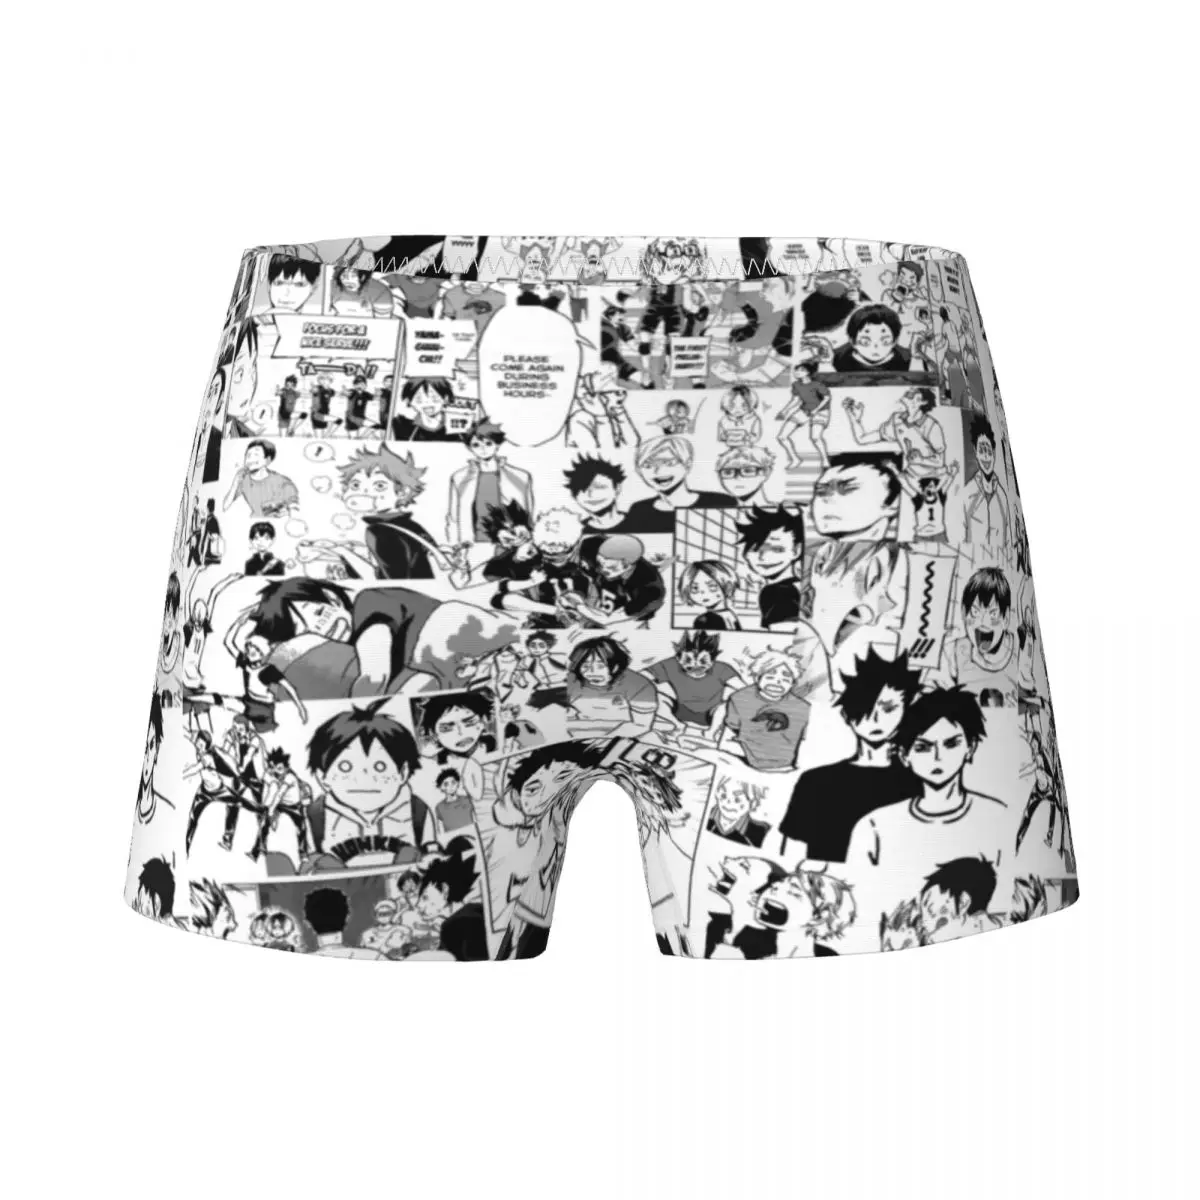 

Girls Haikyuu Manga Collage Boxer Child Pure Cotton Cute Underwear Kids Teenagers Bokuto Volleyball Underpants Briefs For 4-15Y